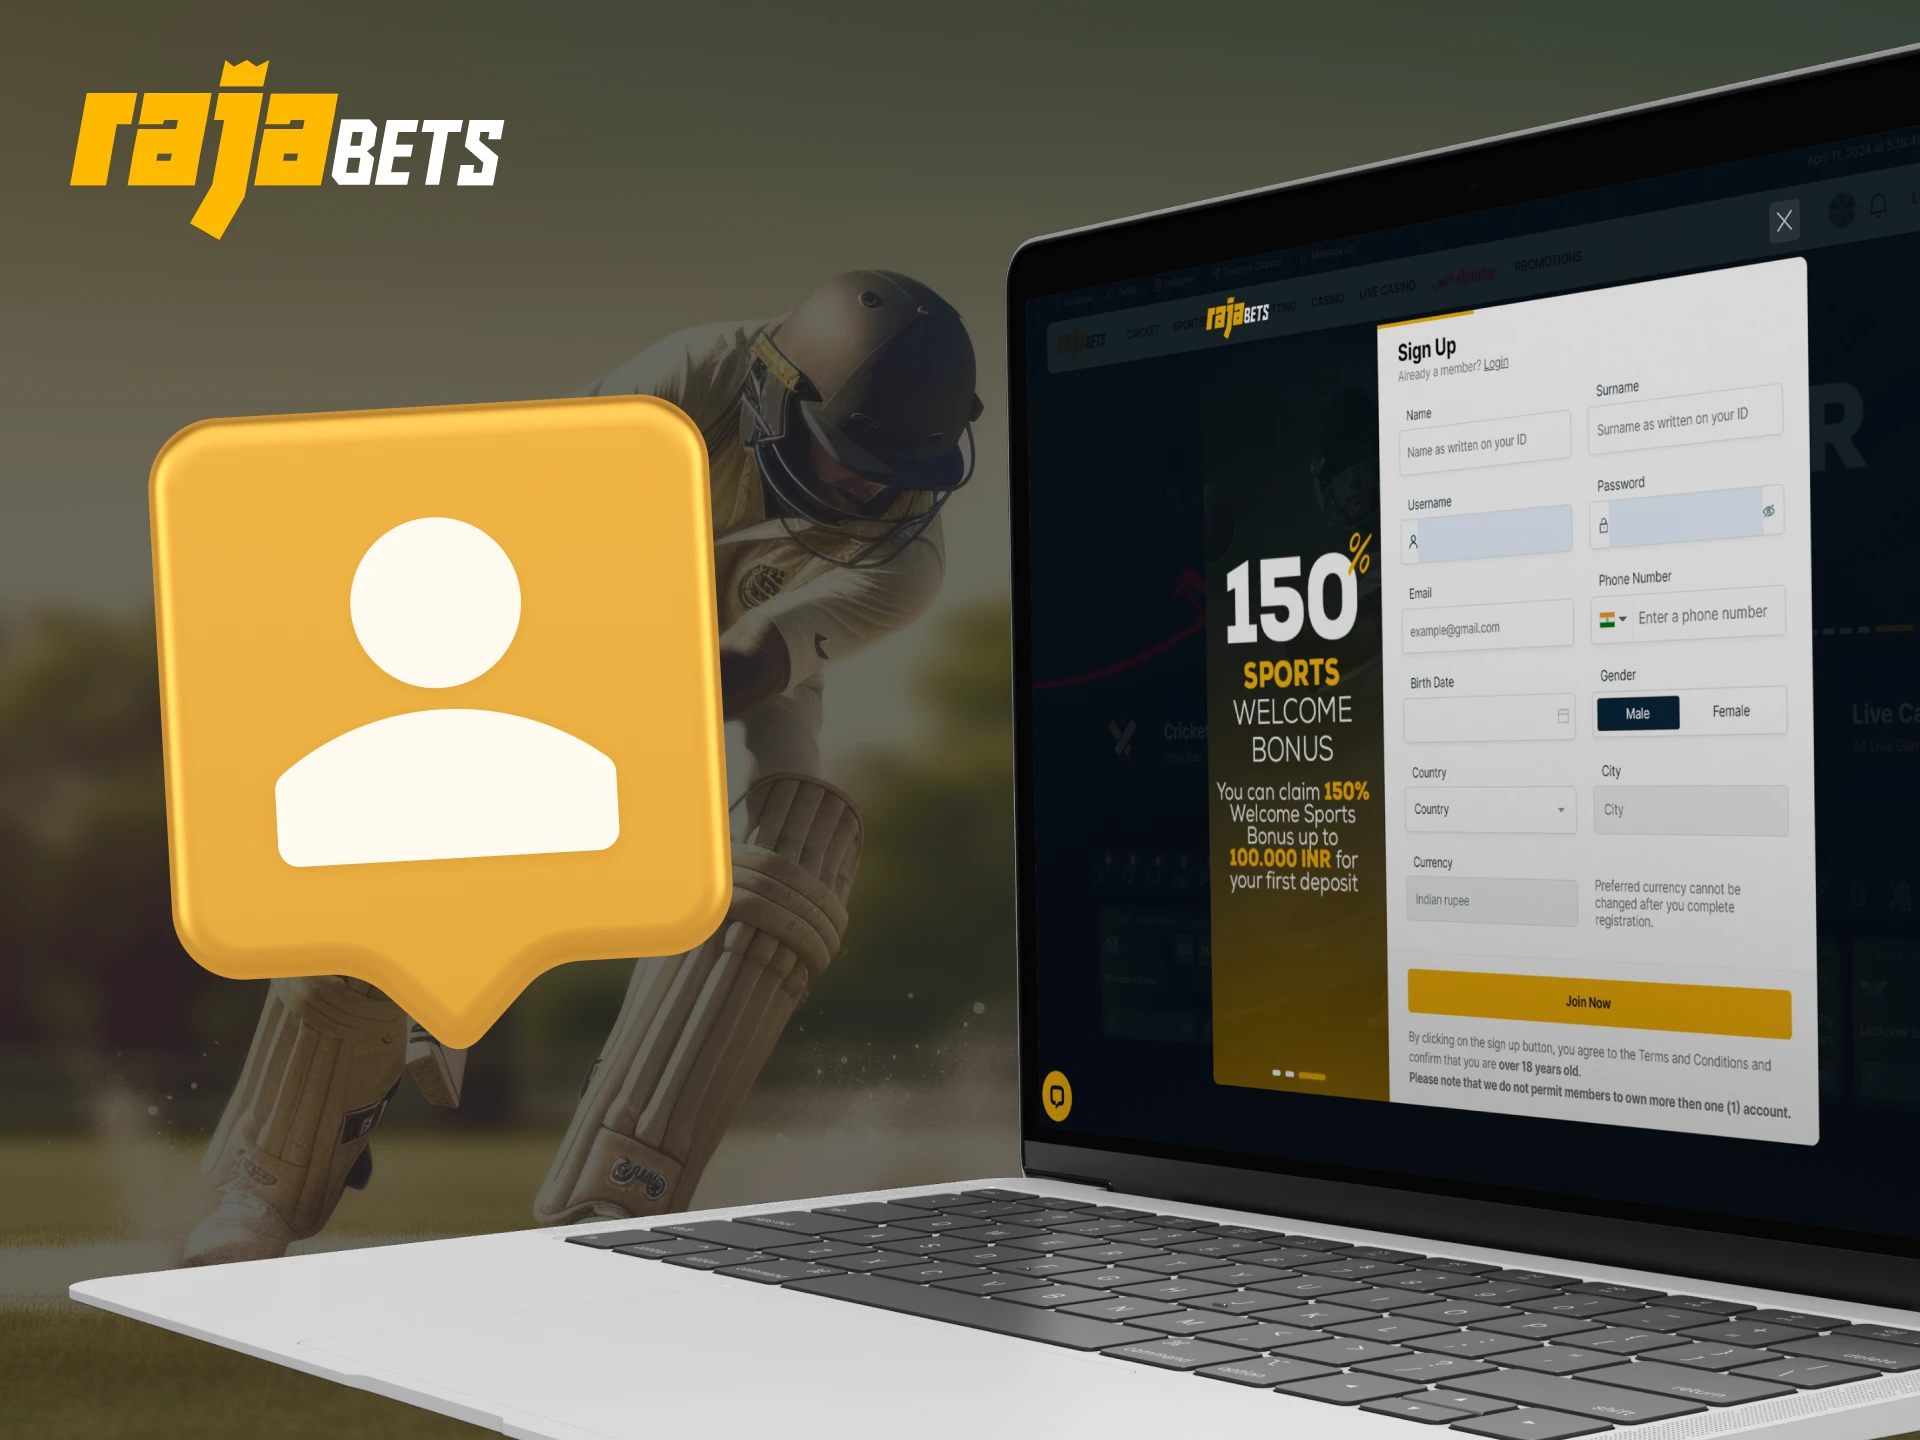 Register at Rajabets Casino in a few steps.